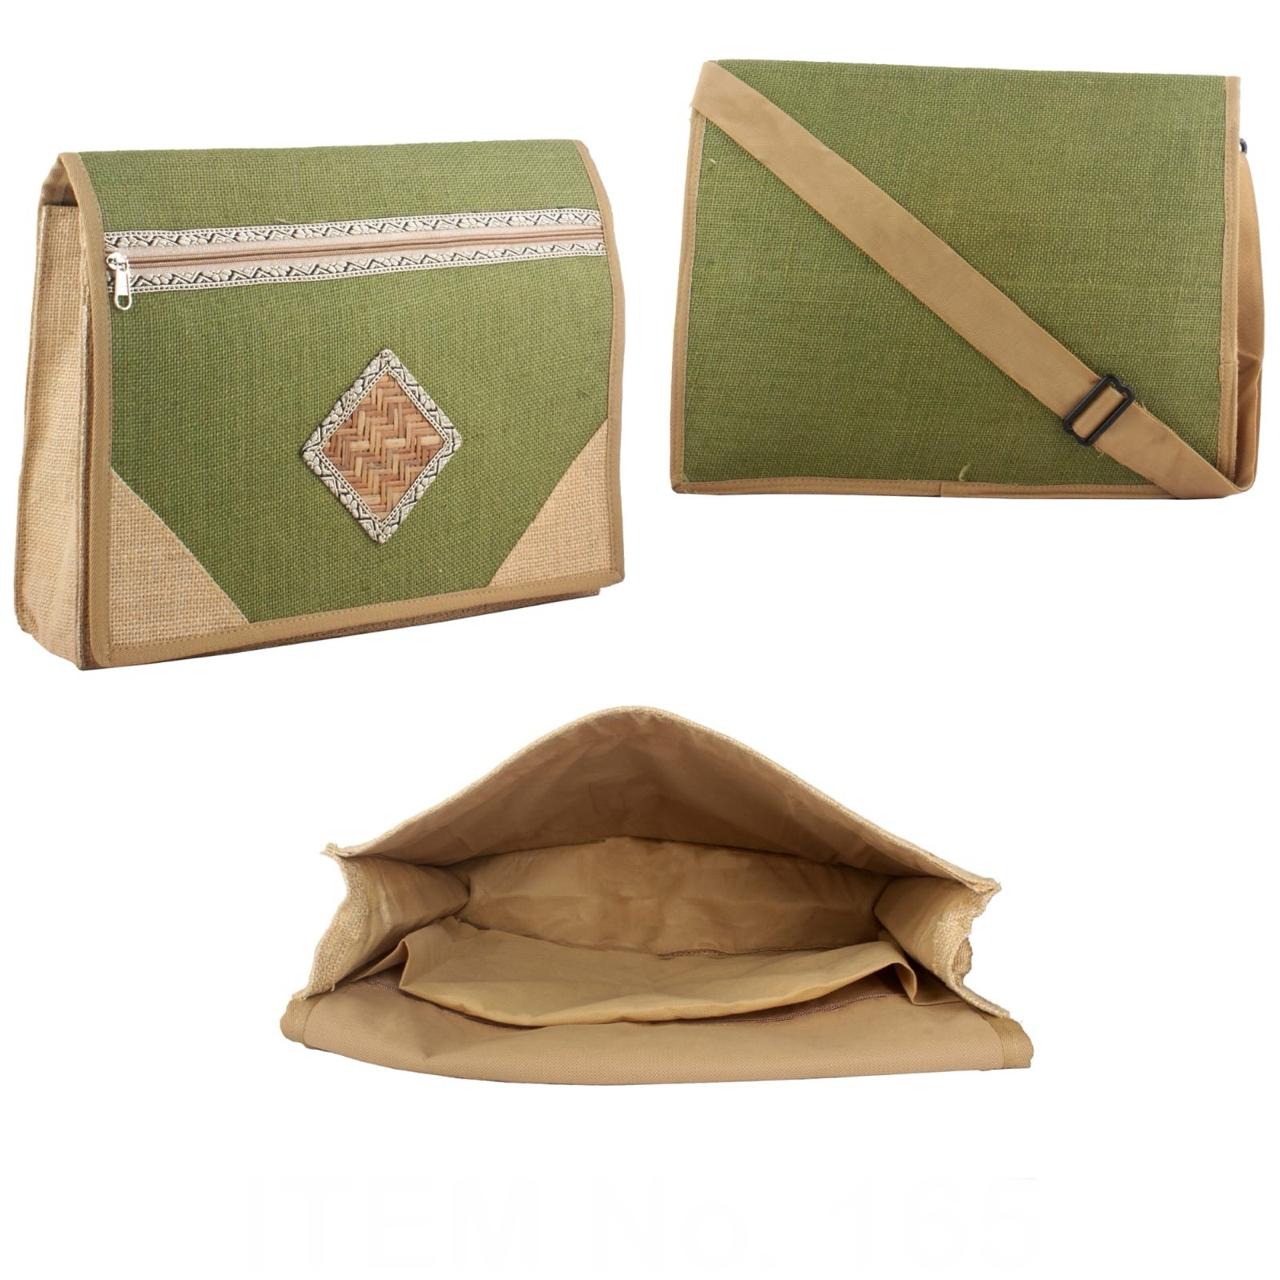 Jute Designer Bags With New Style & Design Handcrafted In India By Tamrapatra